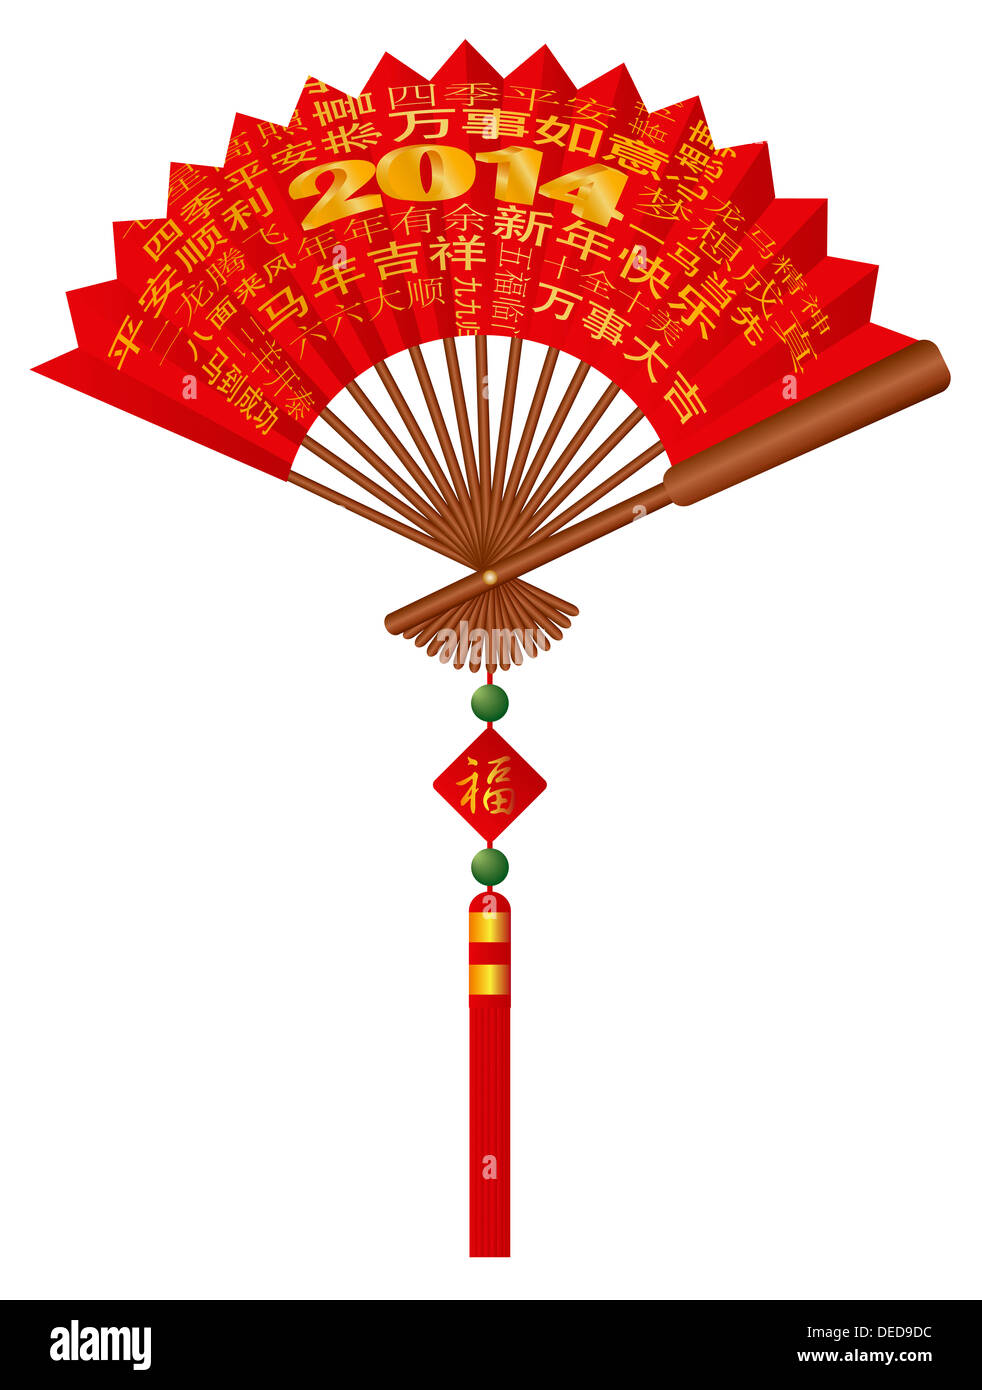 2014 Red Chinese New Year Silk Fan with Season Greetings of Well Wishes Stock Photo